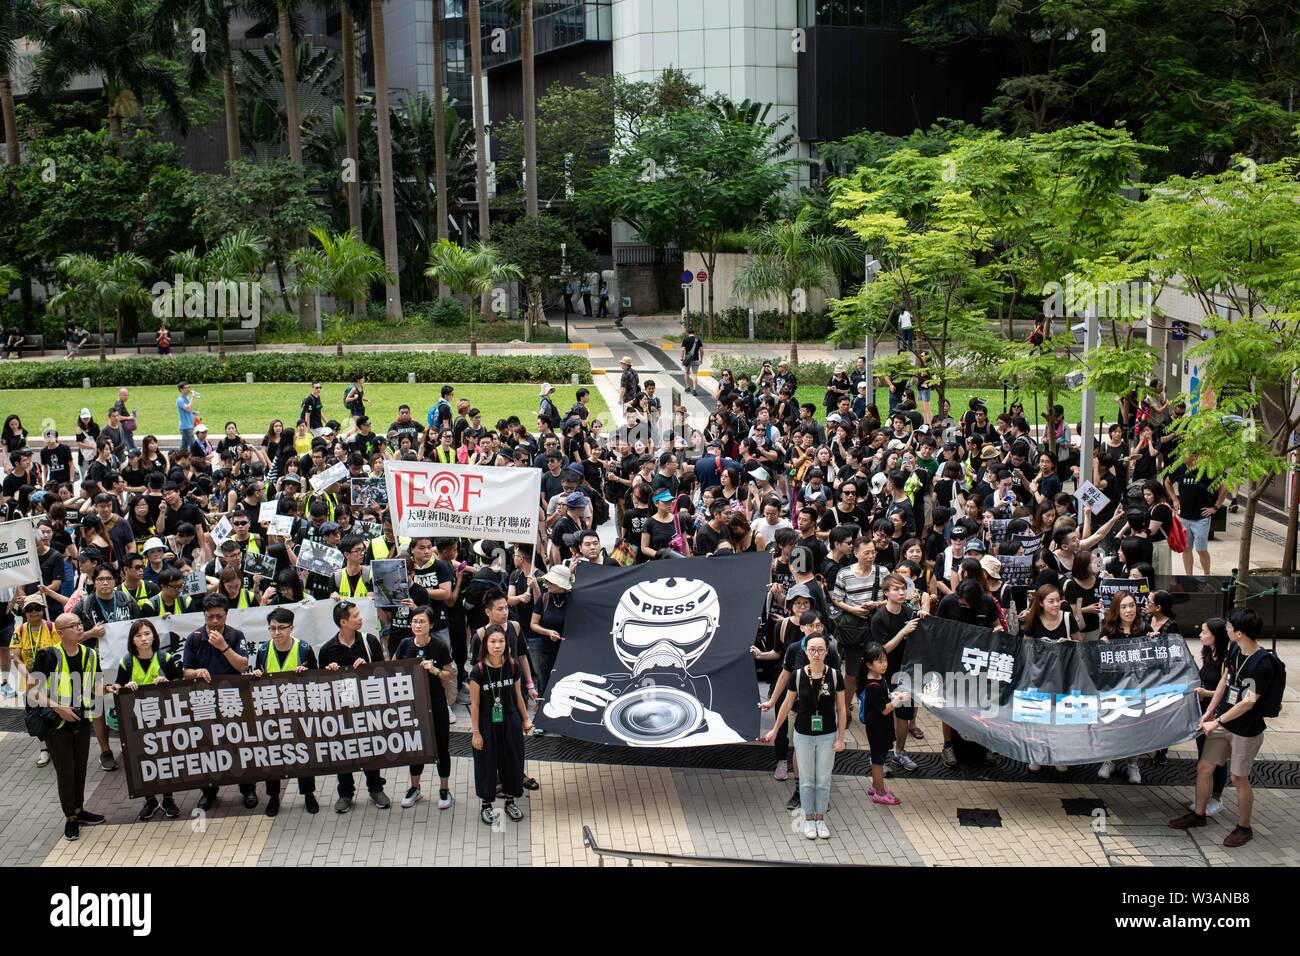 Hong Kong, China. 14th July, 2019. Protesters hold banners during a march claiming for press freedom.Media groups and journalist trade unions held a “Stop Police Violence, Defend Press Freedom” silent march to express demands that police facilitates the work of news media and respect press freedom. The protest were called after media professionals suffered aggressions and were insulted by police officers while covering the protests against the extradition law to China. Credit: SOPA Images Limited/Alamy Live News Stock Photo